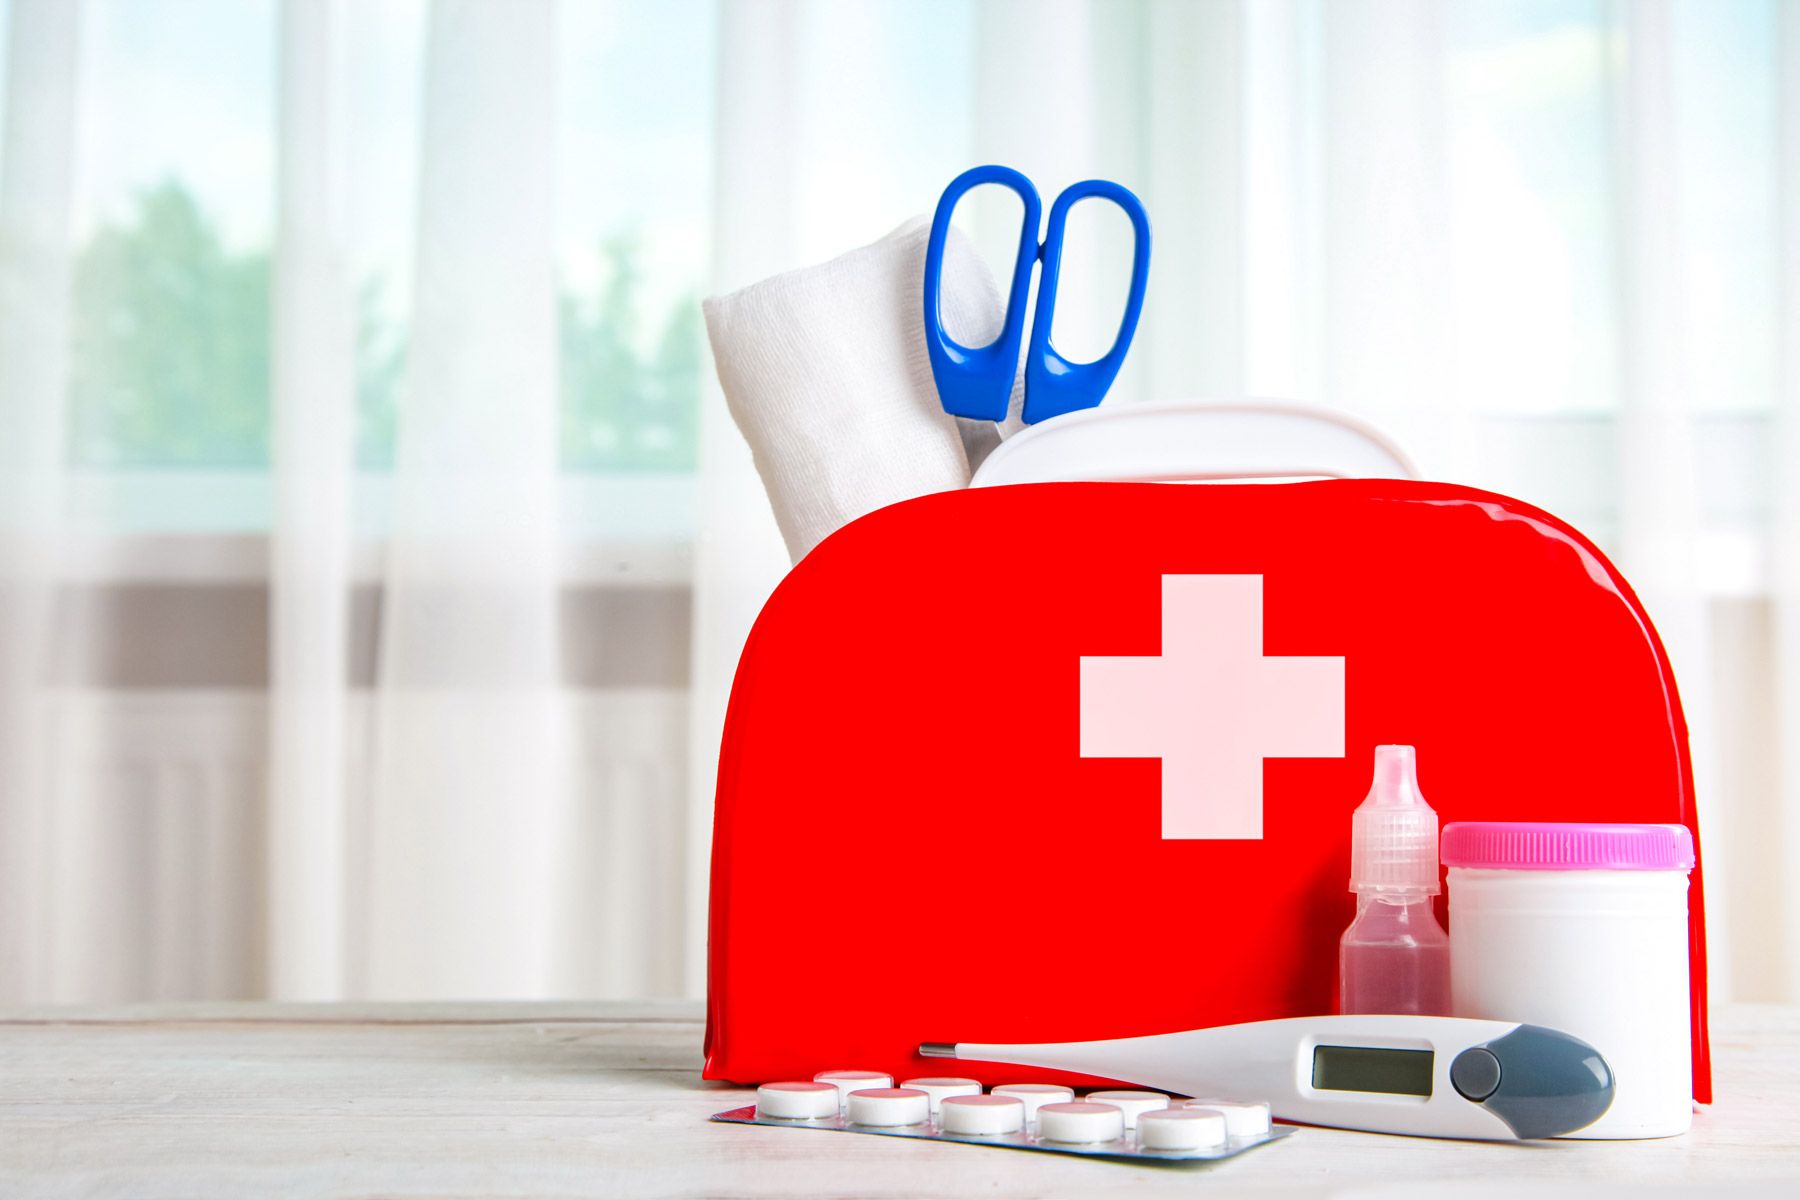 26-First-aid-kit-1